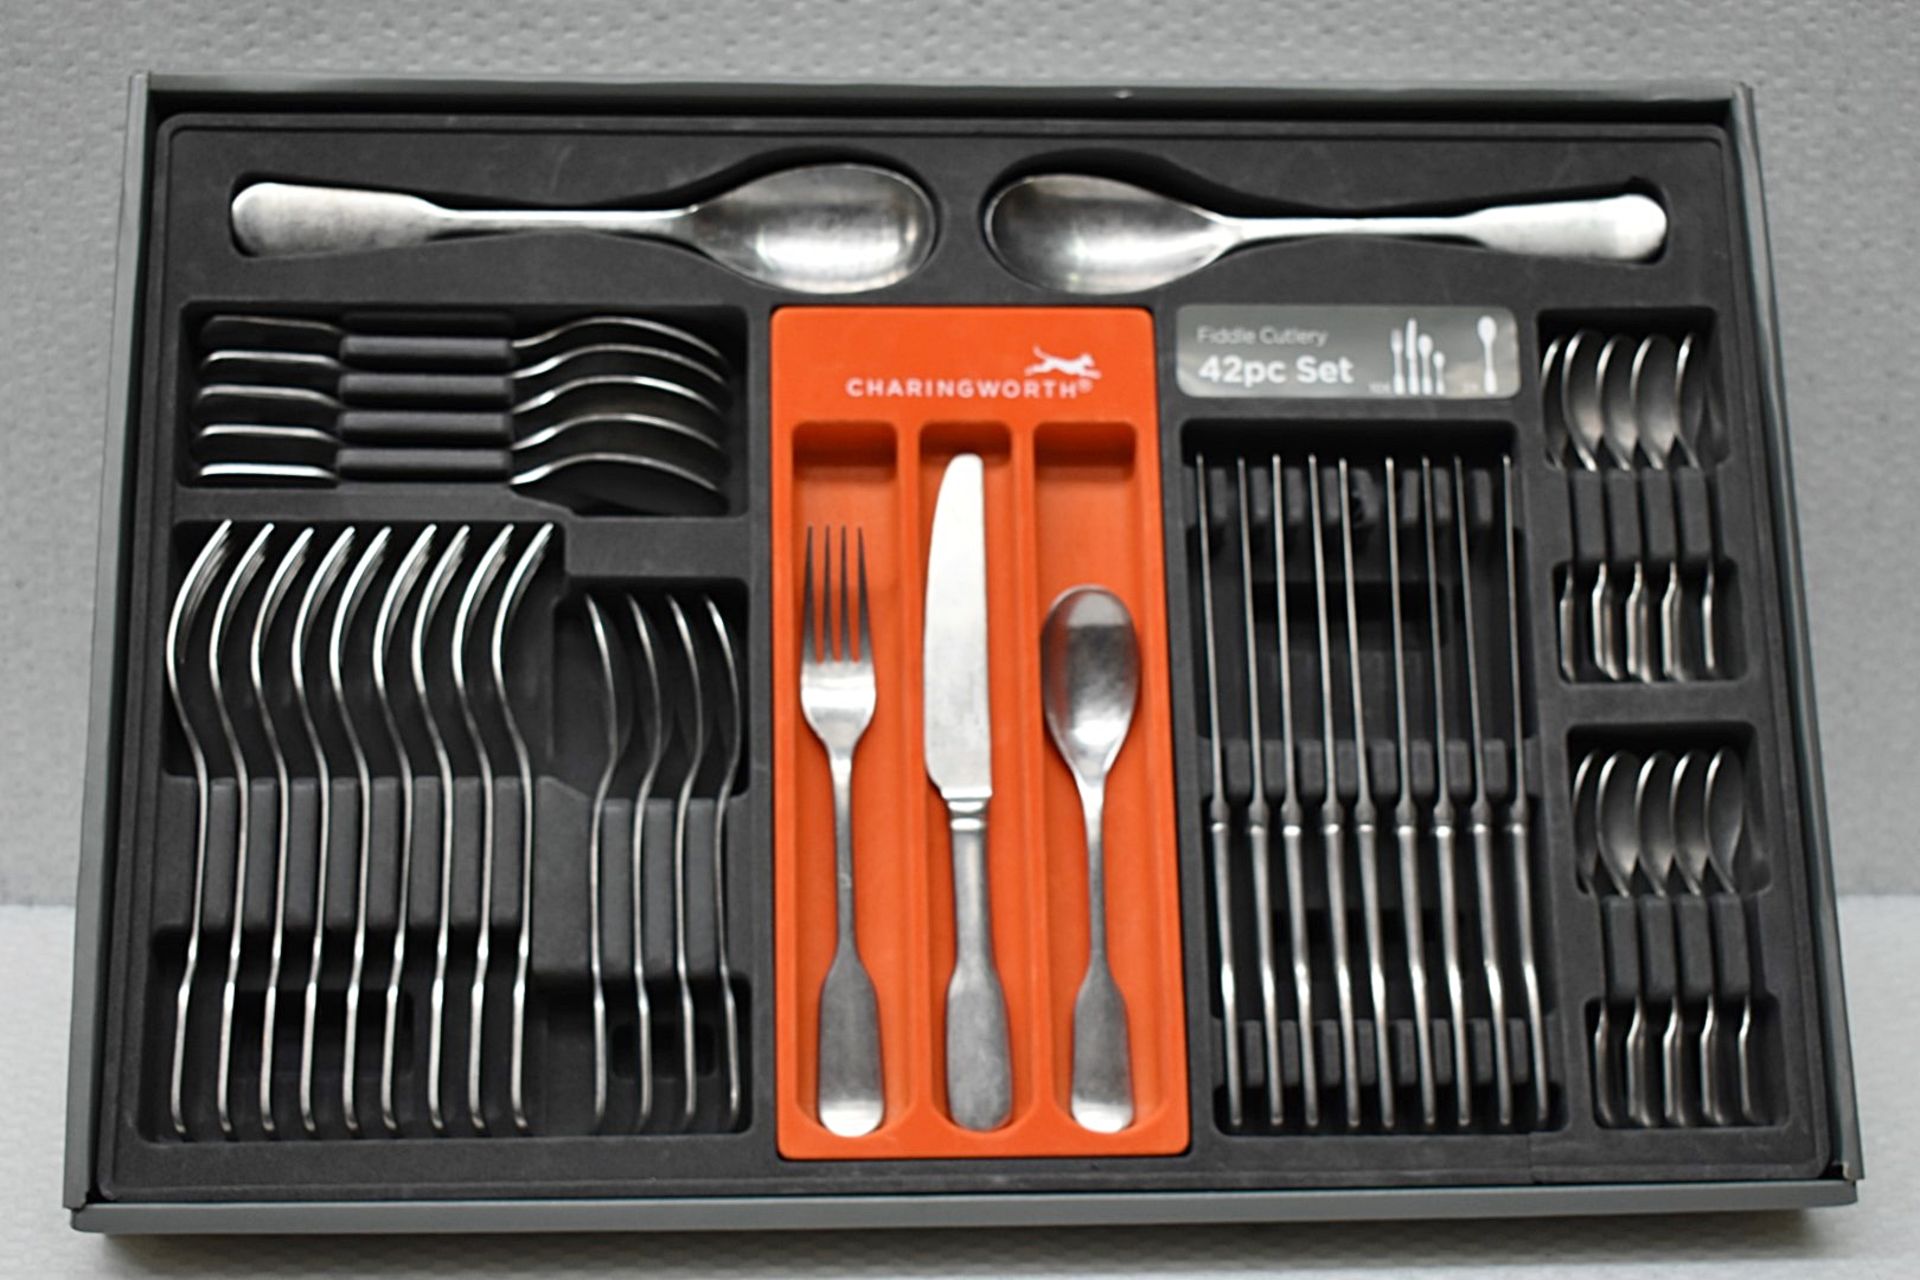 1 x CHARINGWORTH 'Fiddle' Luxury Vintage-style 42-Piece Cutlery Set - Original Price £370.00 - Boxed - Image 5 of 11